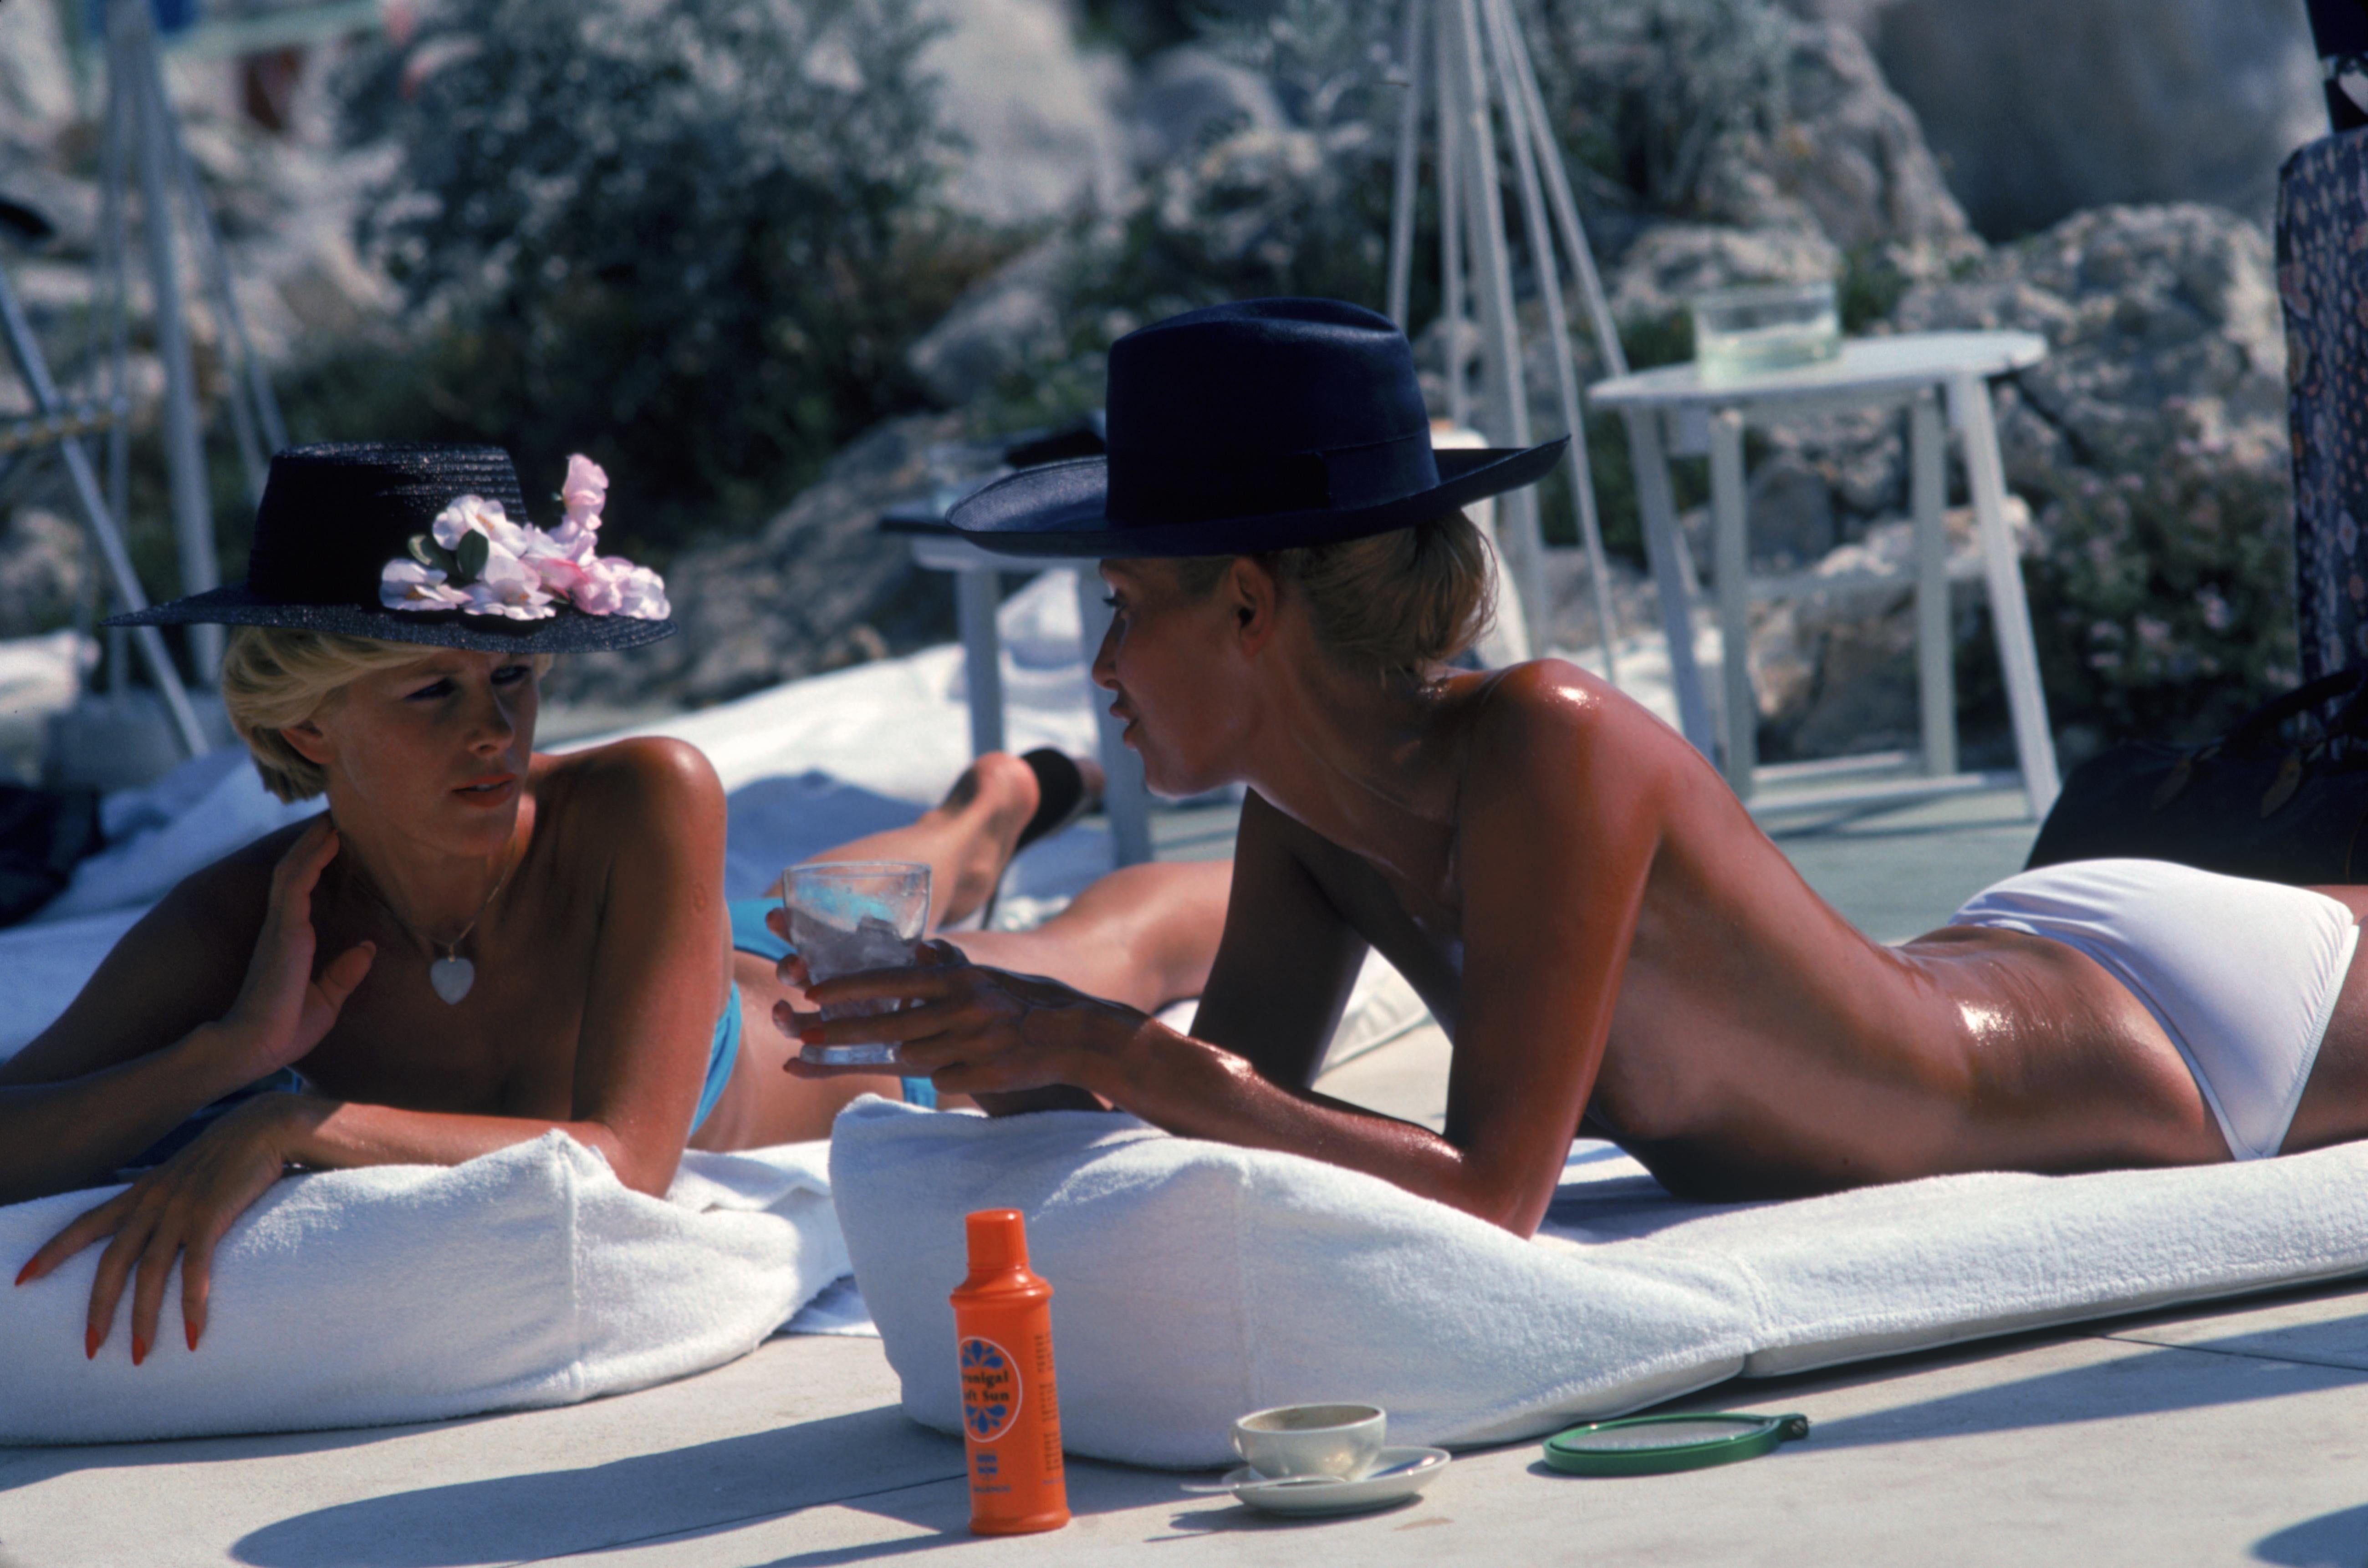 'Sunbathing In Antibes' 1976 Slim Aarons Limited Estate Edition

Dani Geneux (left) and Marie-Eugenie Gaudfrin sunbathing at the Hotel du Cap Eden-Roc, Antibes, France, August 1976. 

Produced from the original transparency
Certificate of